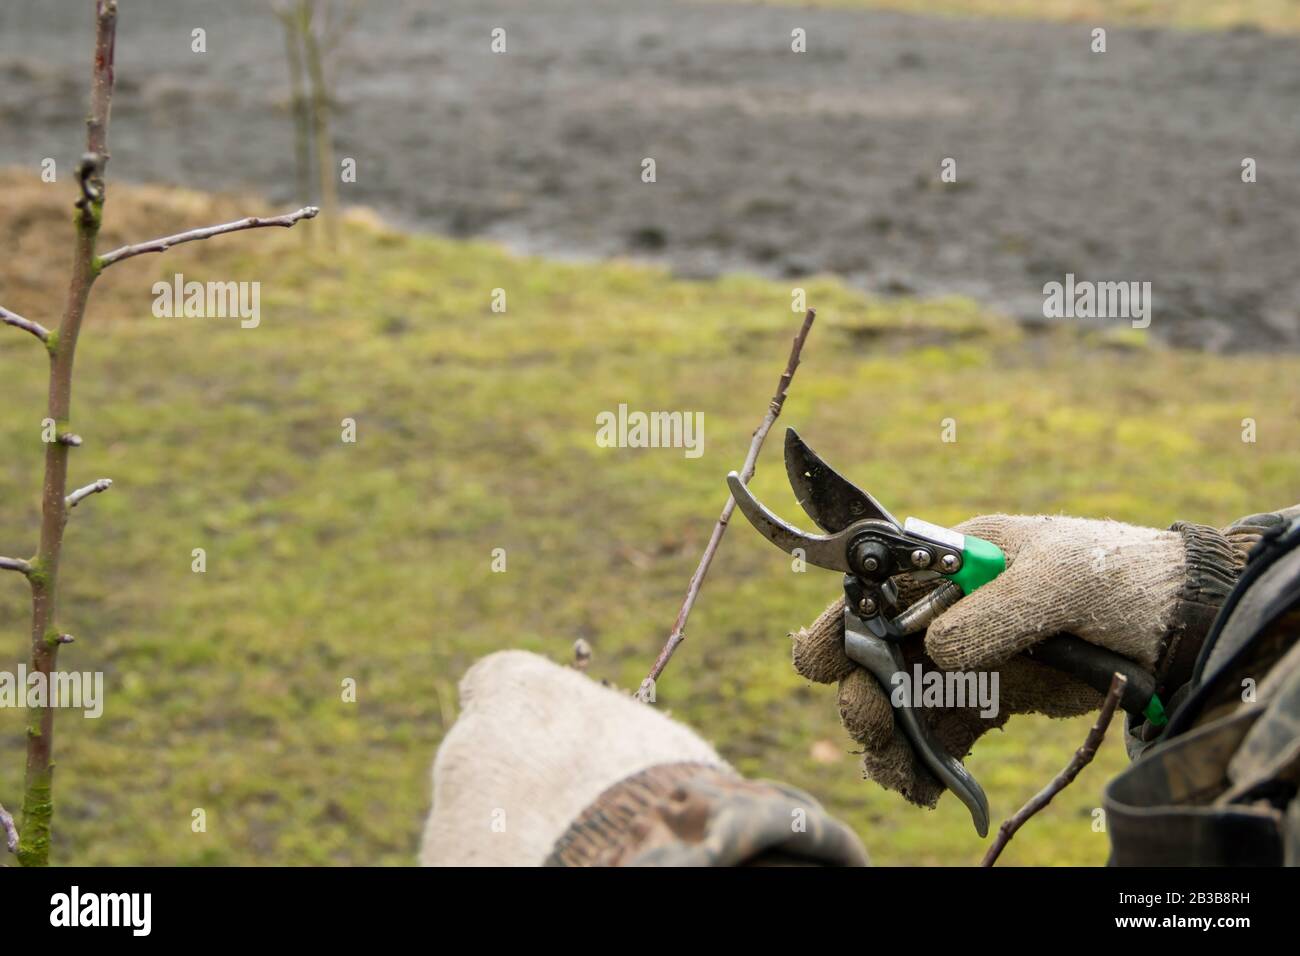 Pruning a young apple tree with garden secateurs in the autumn garden. Cutting faded stems, hedge, branches with gardening tools, secateurs, scissors. Stock Photo